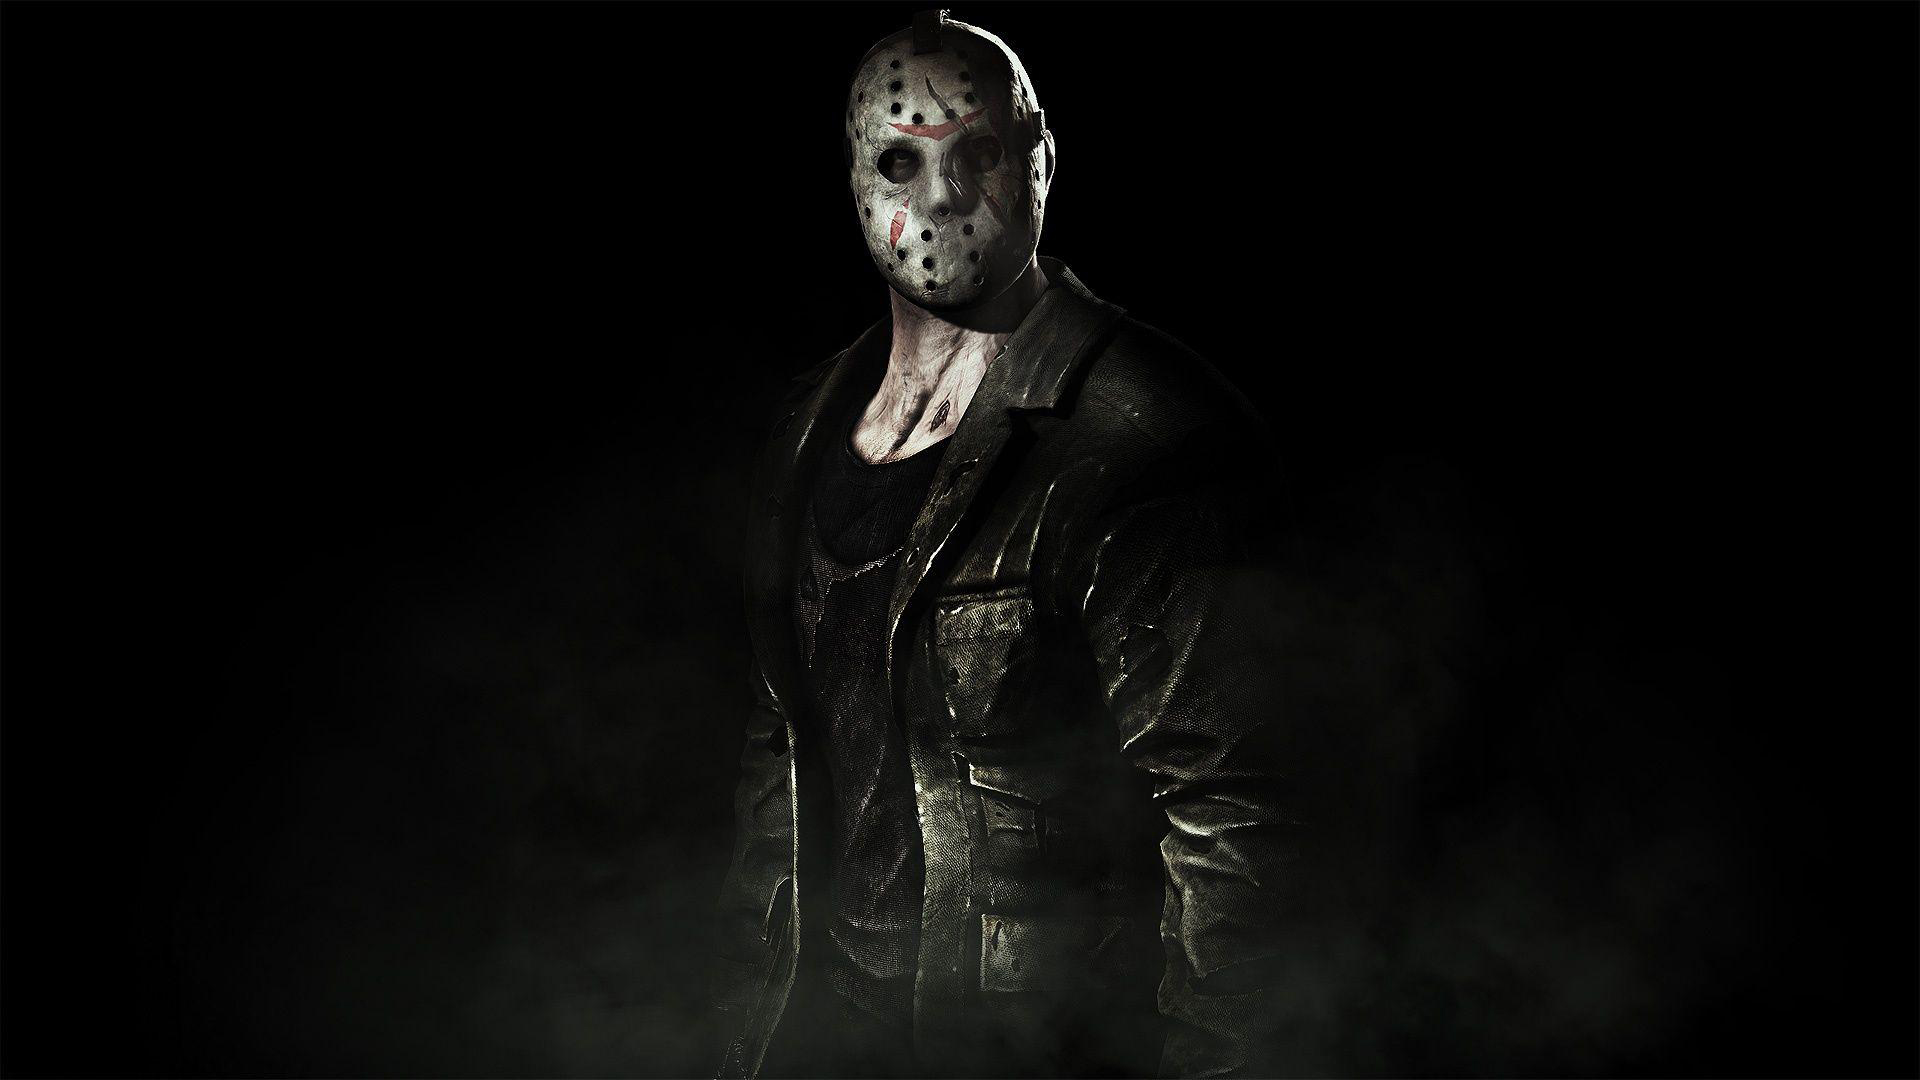 3400x1440 Jason Voorhees Friday The 13th 3400x1440 Resolution Wallpaper ...